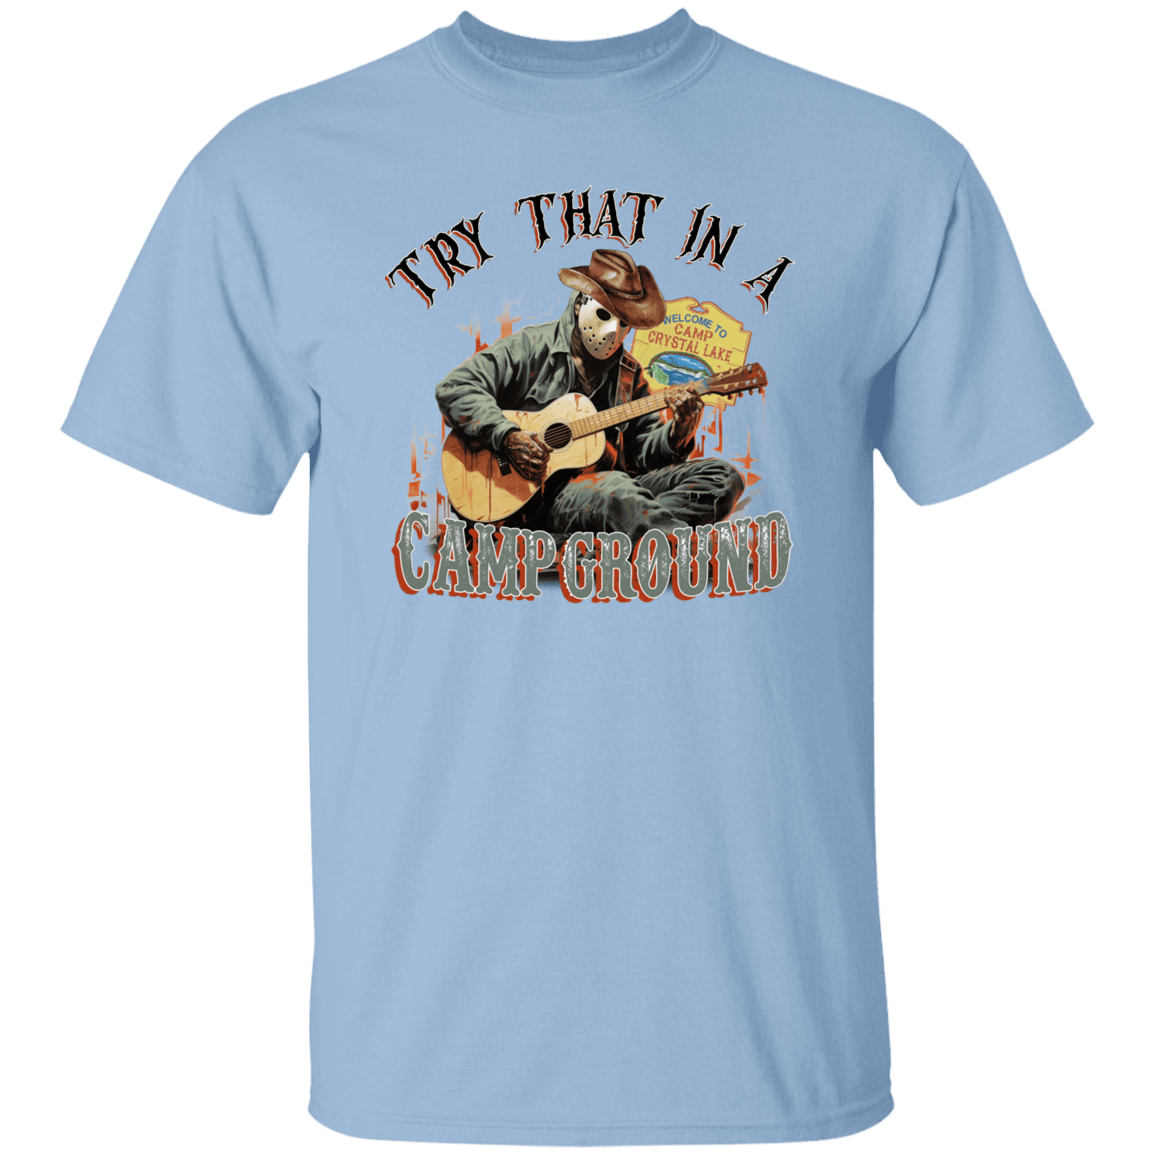 Try That at a Campground T-Shirt